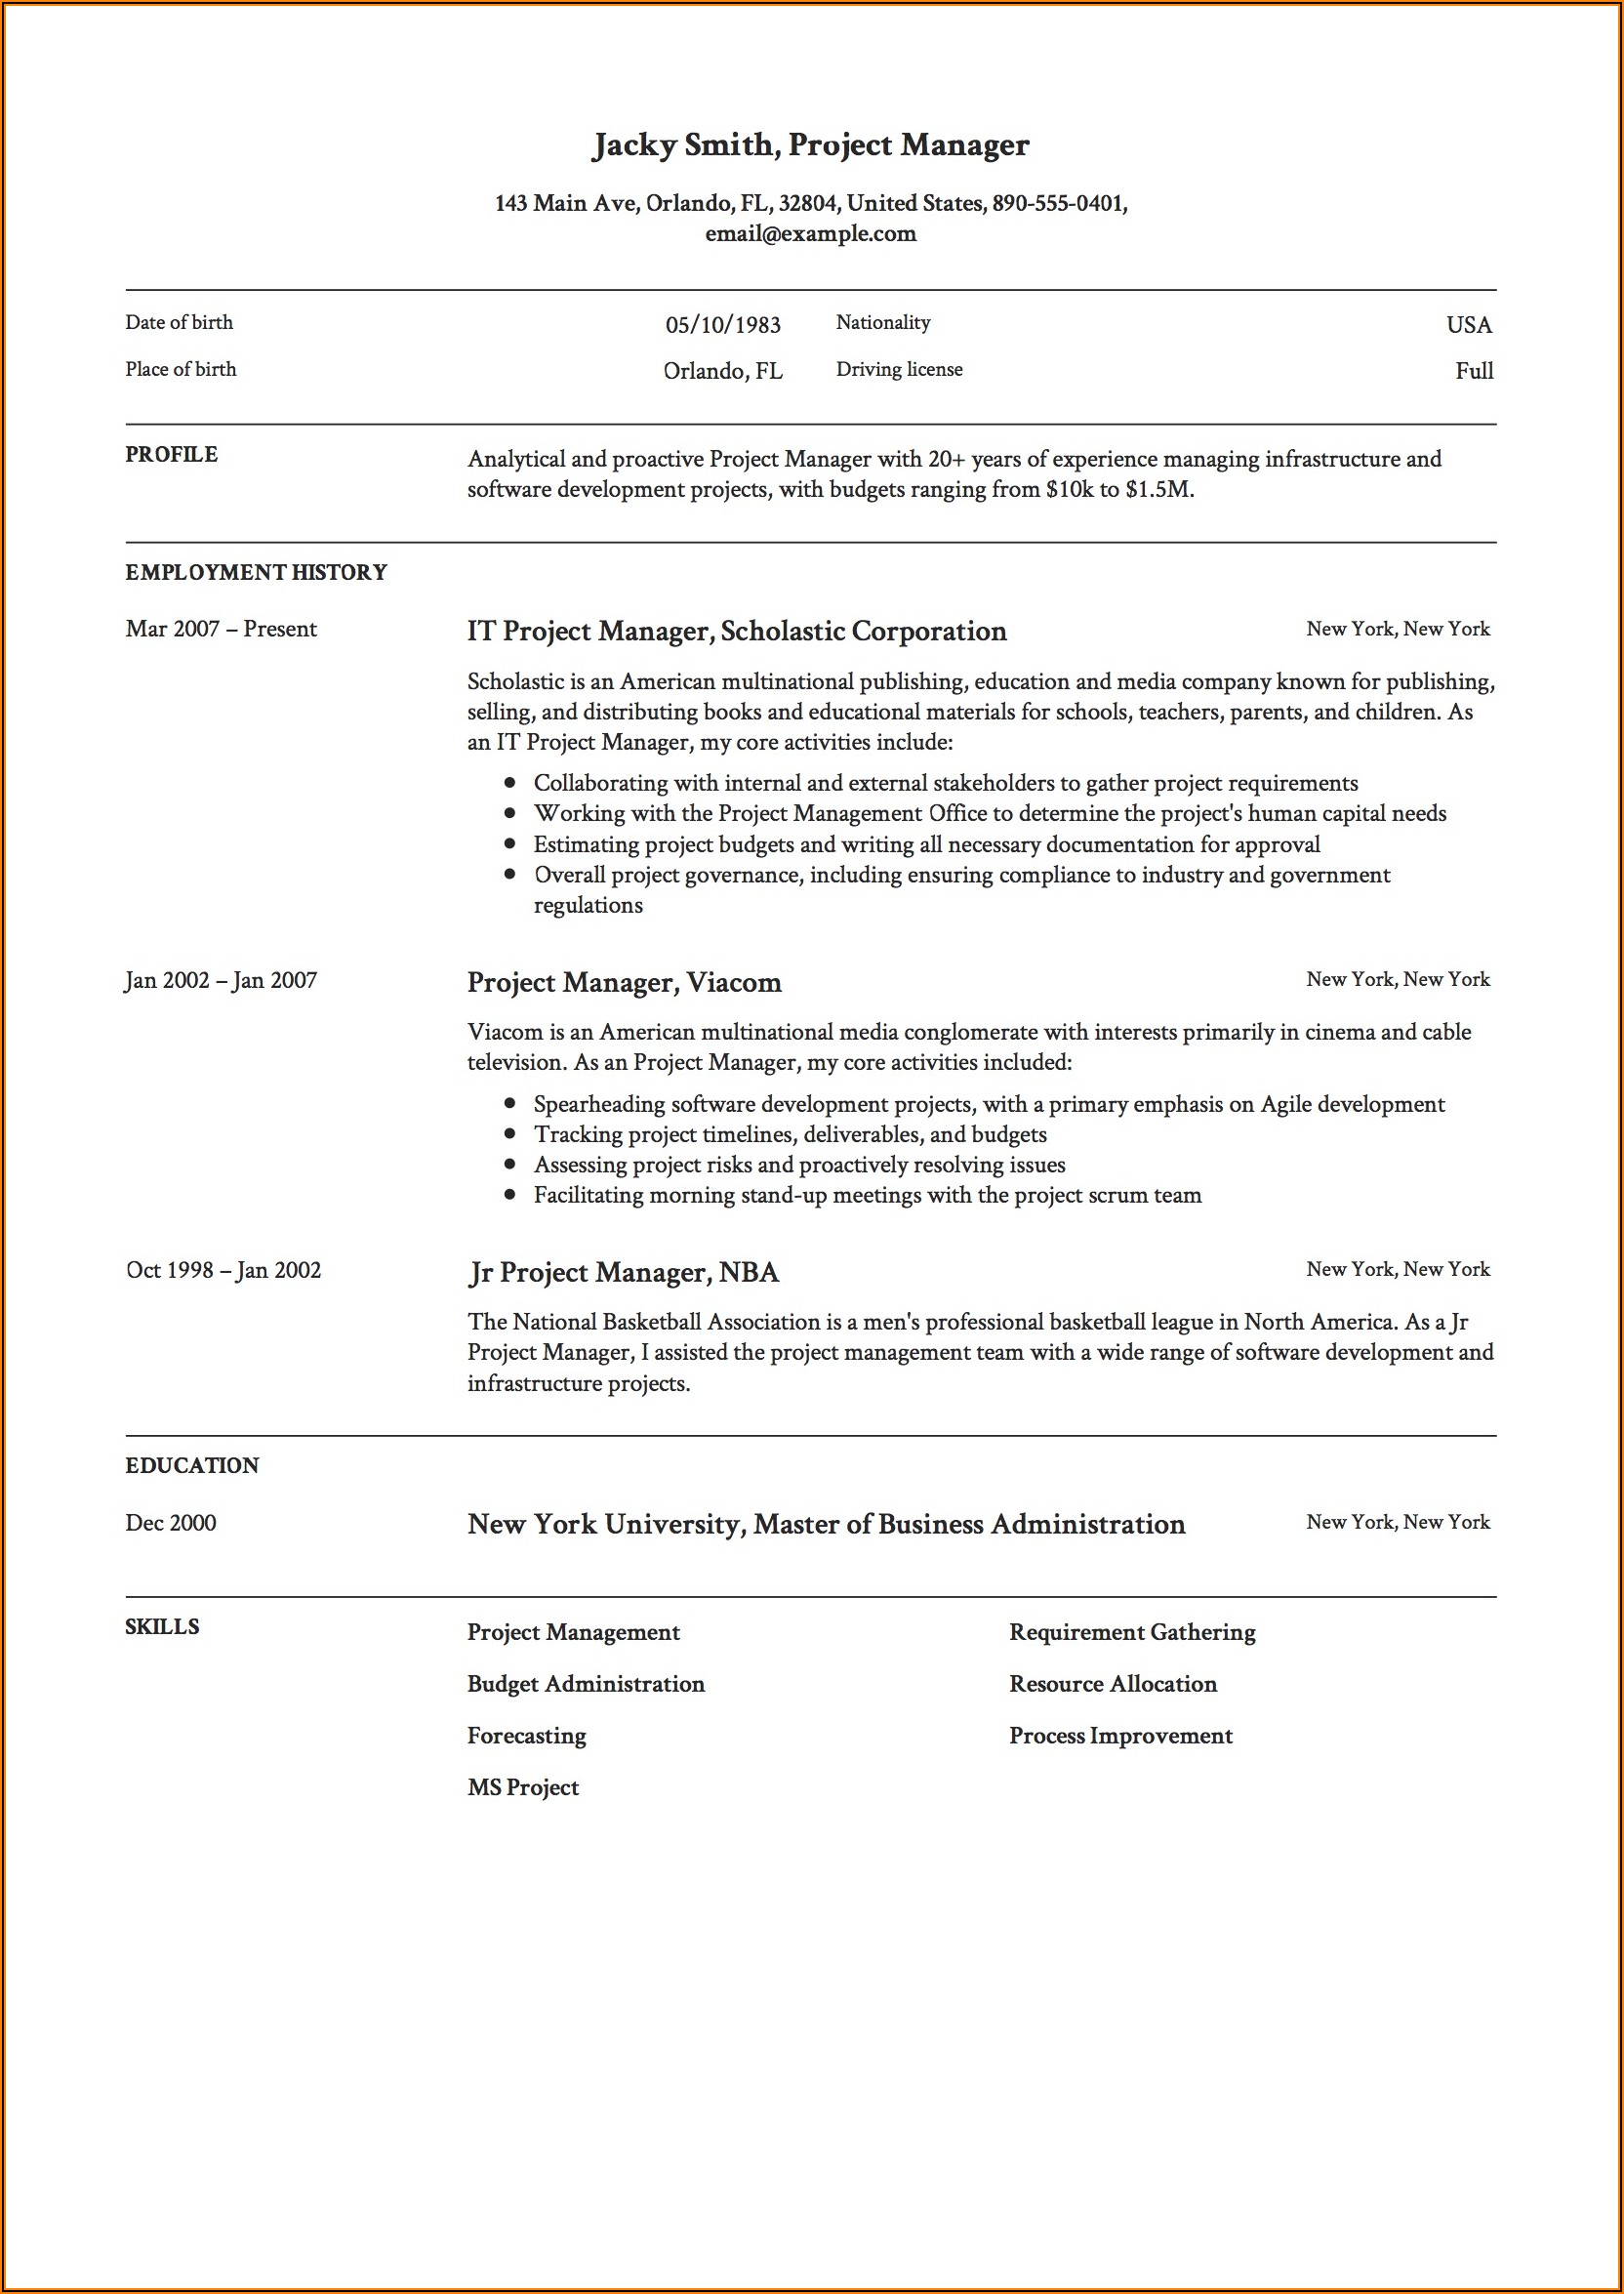 Fill In The Blank Resume Template Pdf